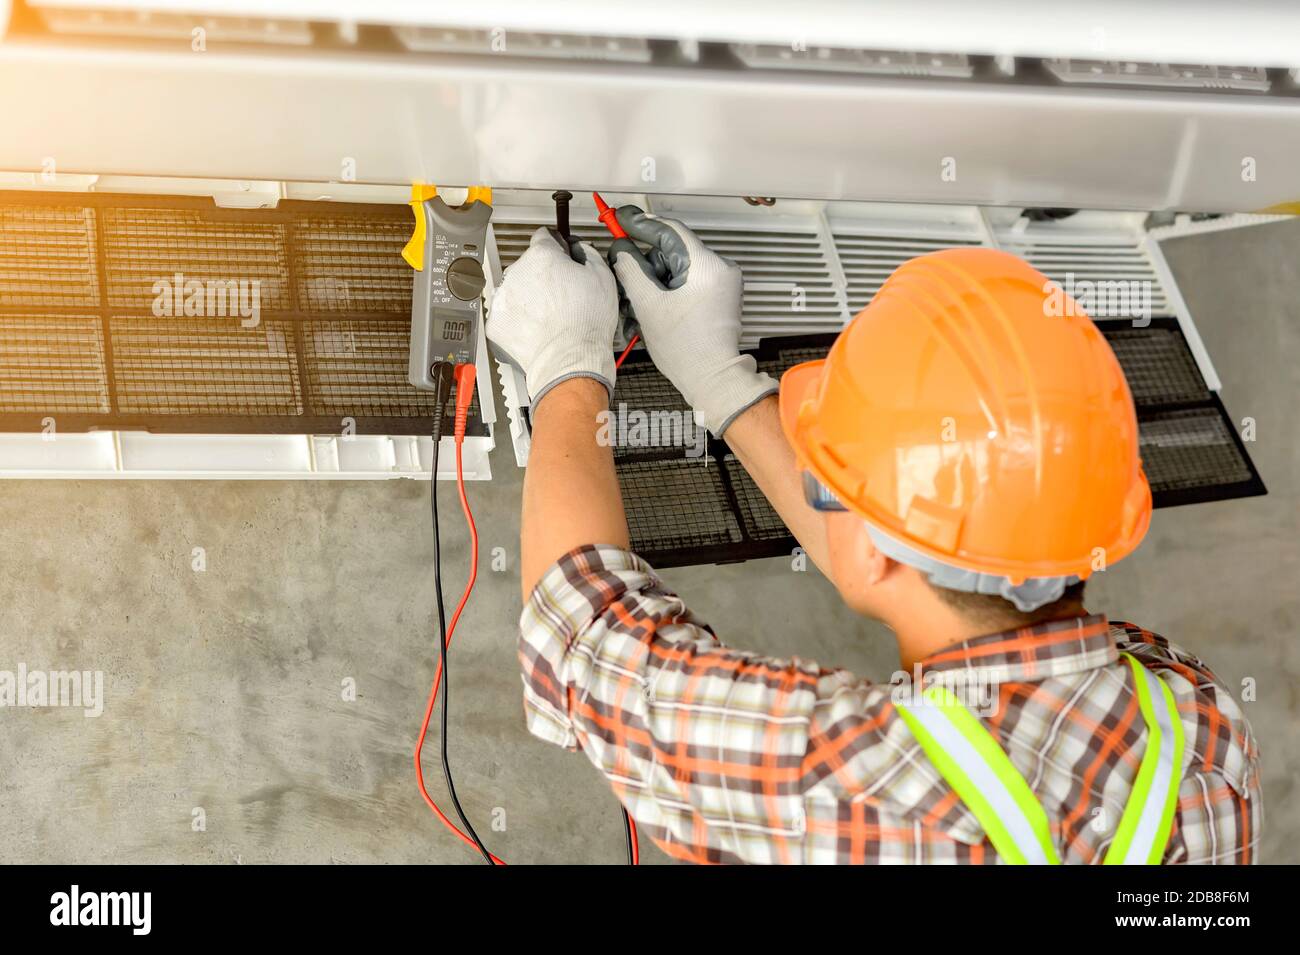 Electrician installing an air conditioning unit on a wall, Thailand Stock Photo